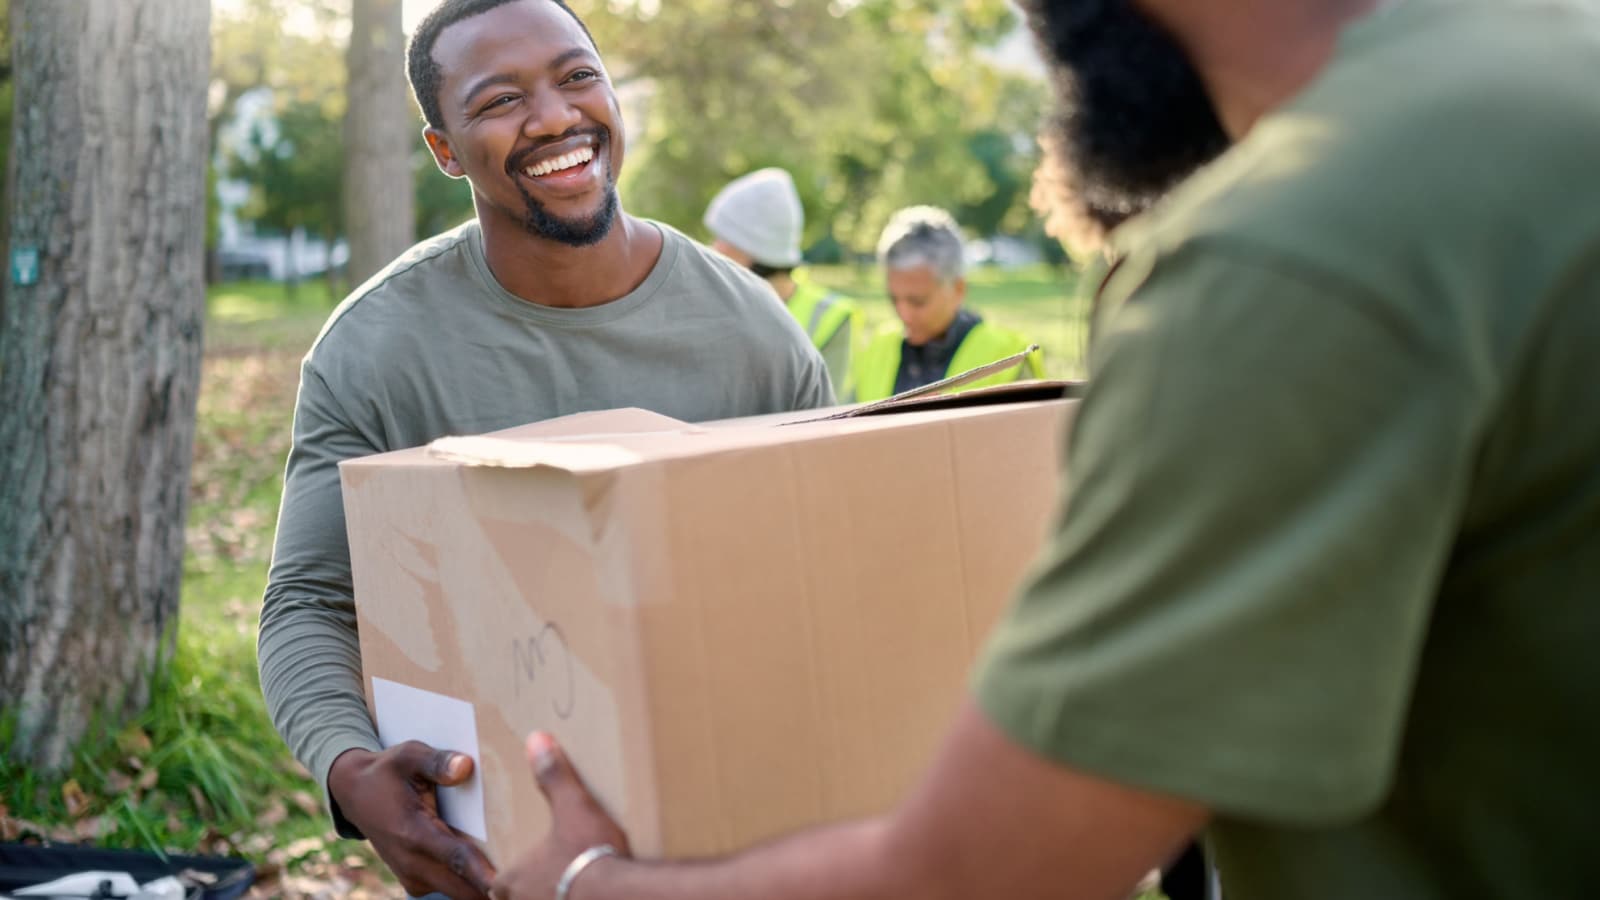 Black man, volunteering and giving box in park of donation, community service or social responsibility. Happy guy, NGO worker and helping with package outdoor for charity, support or society outreach